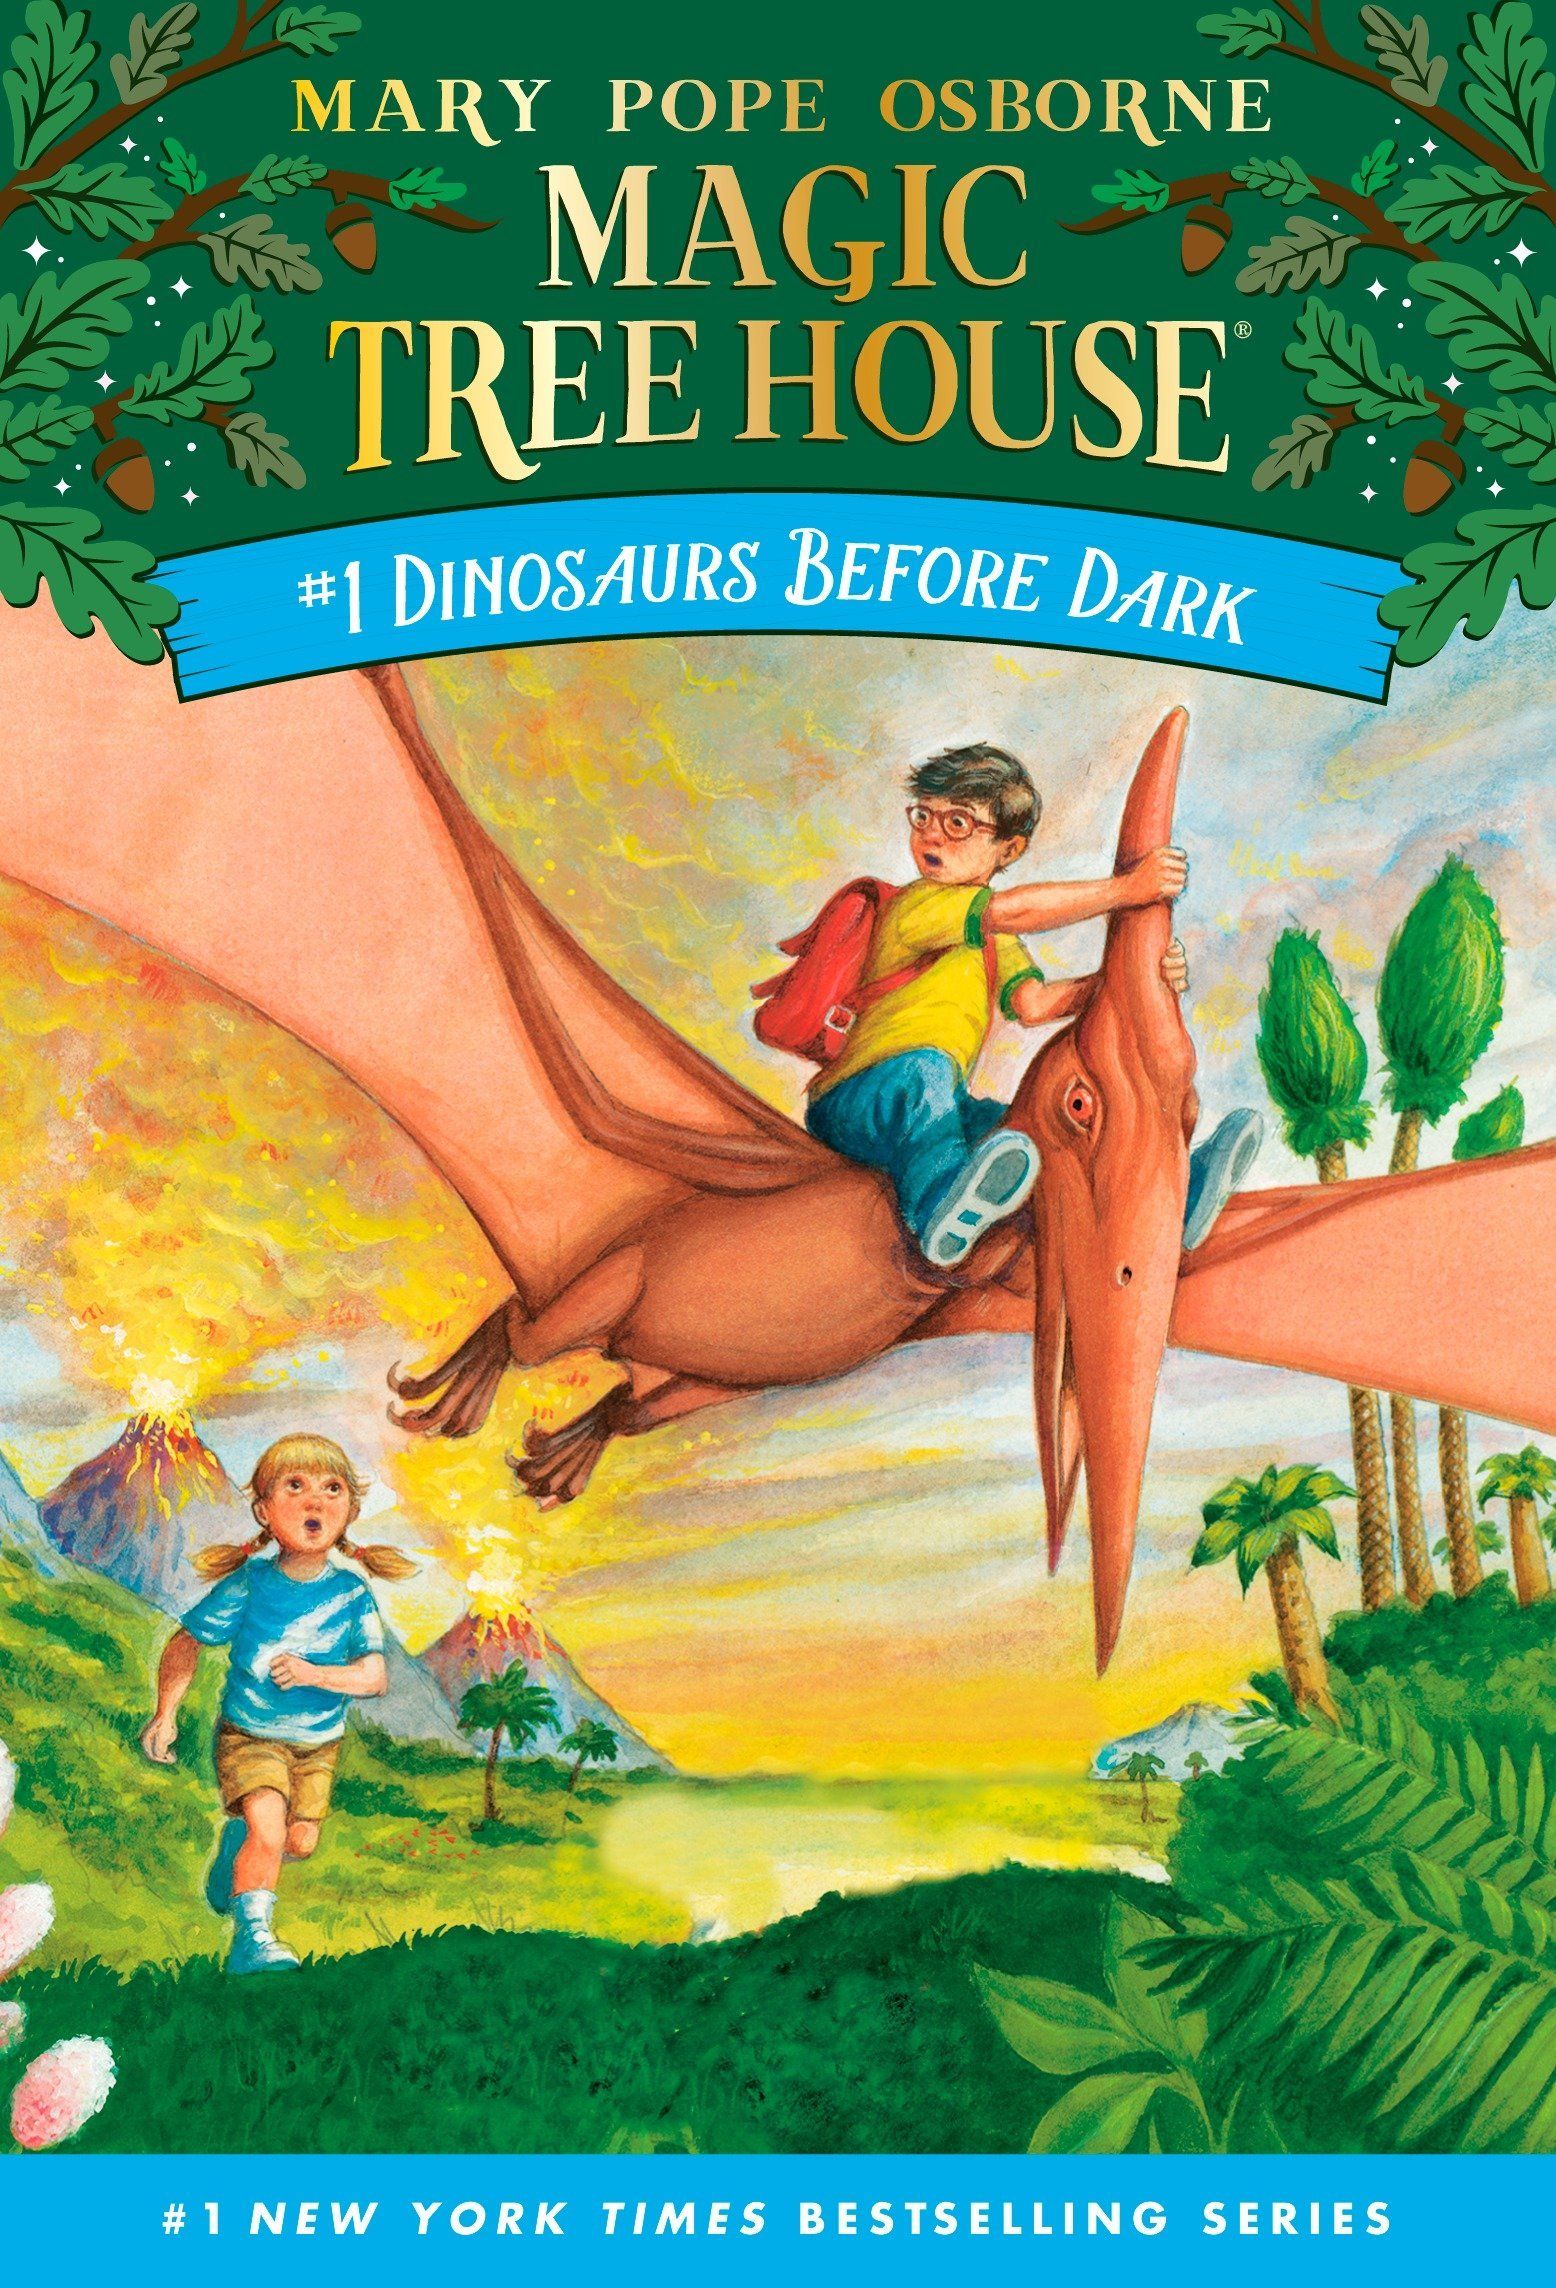 Magic Tree House cover of volume 1